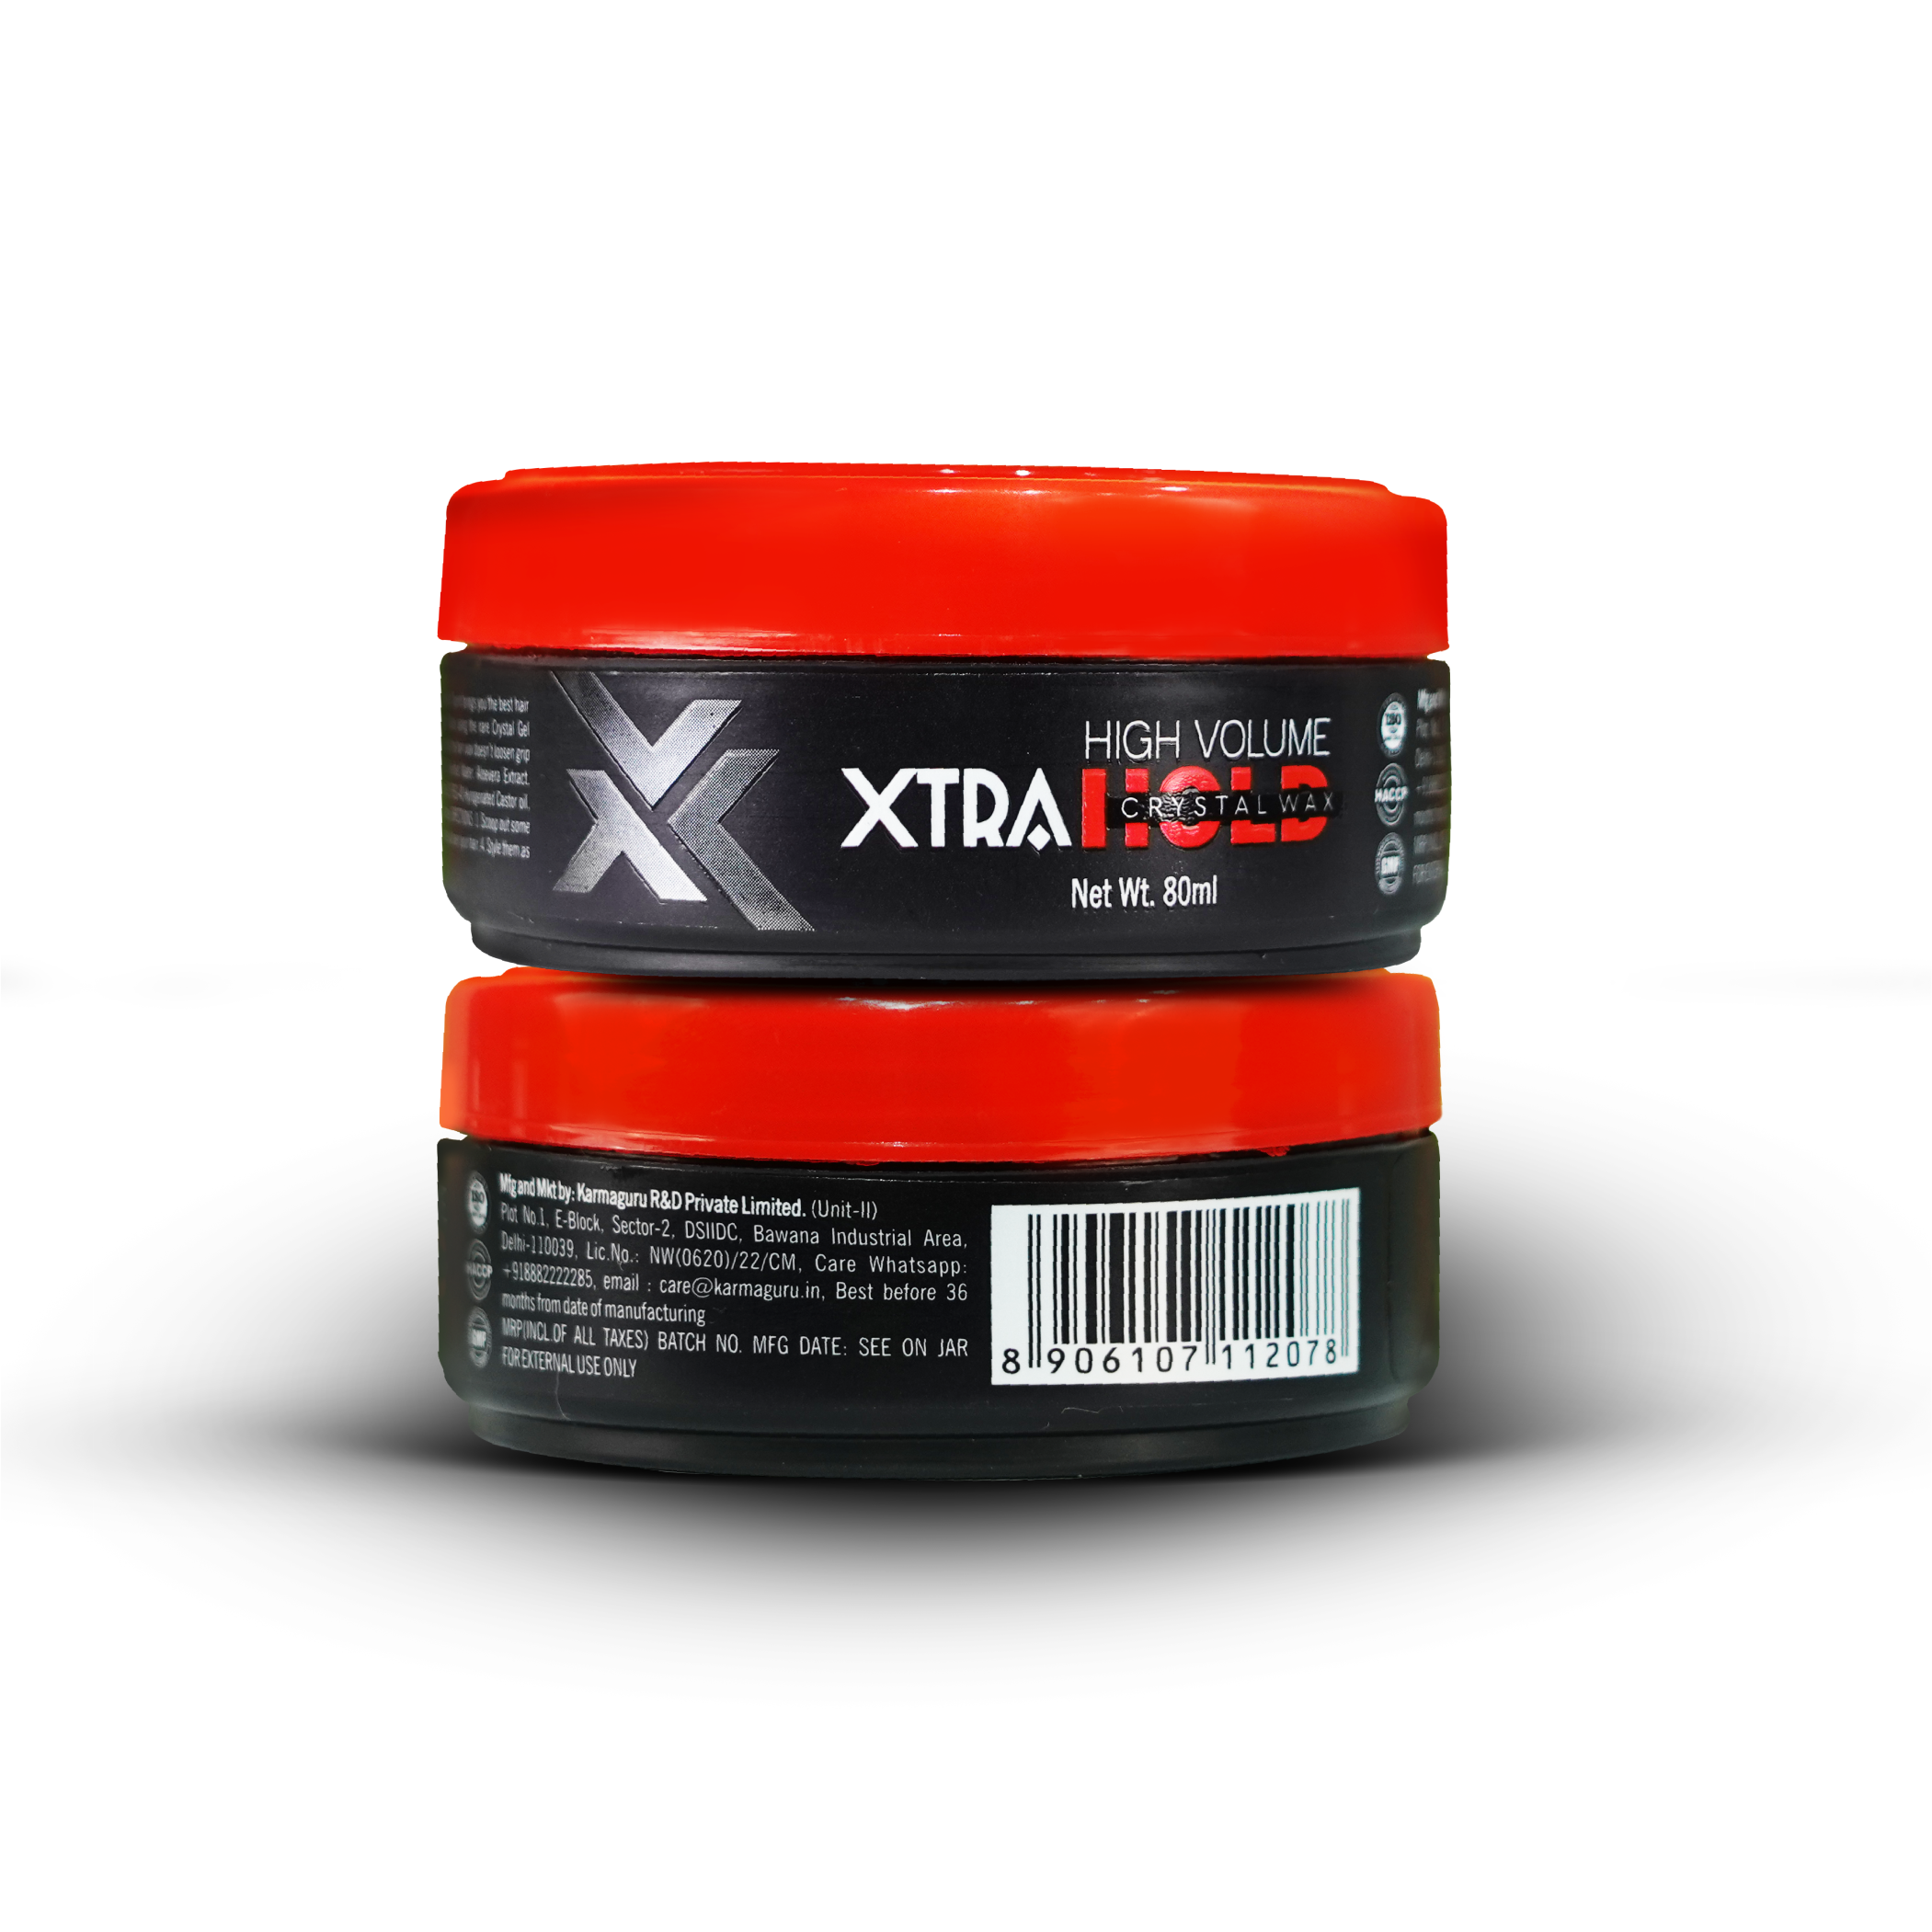 Xtra Strong Hold Hair Wax